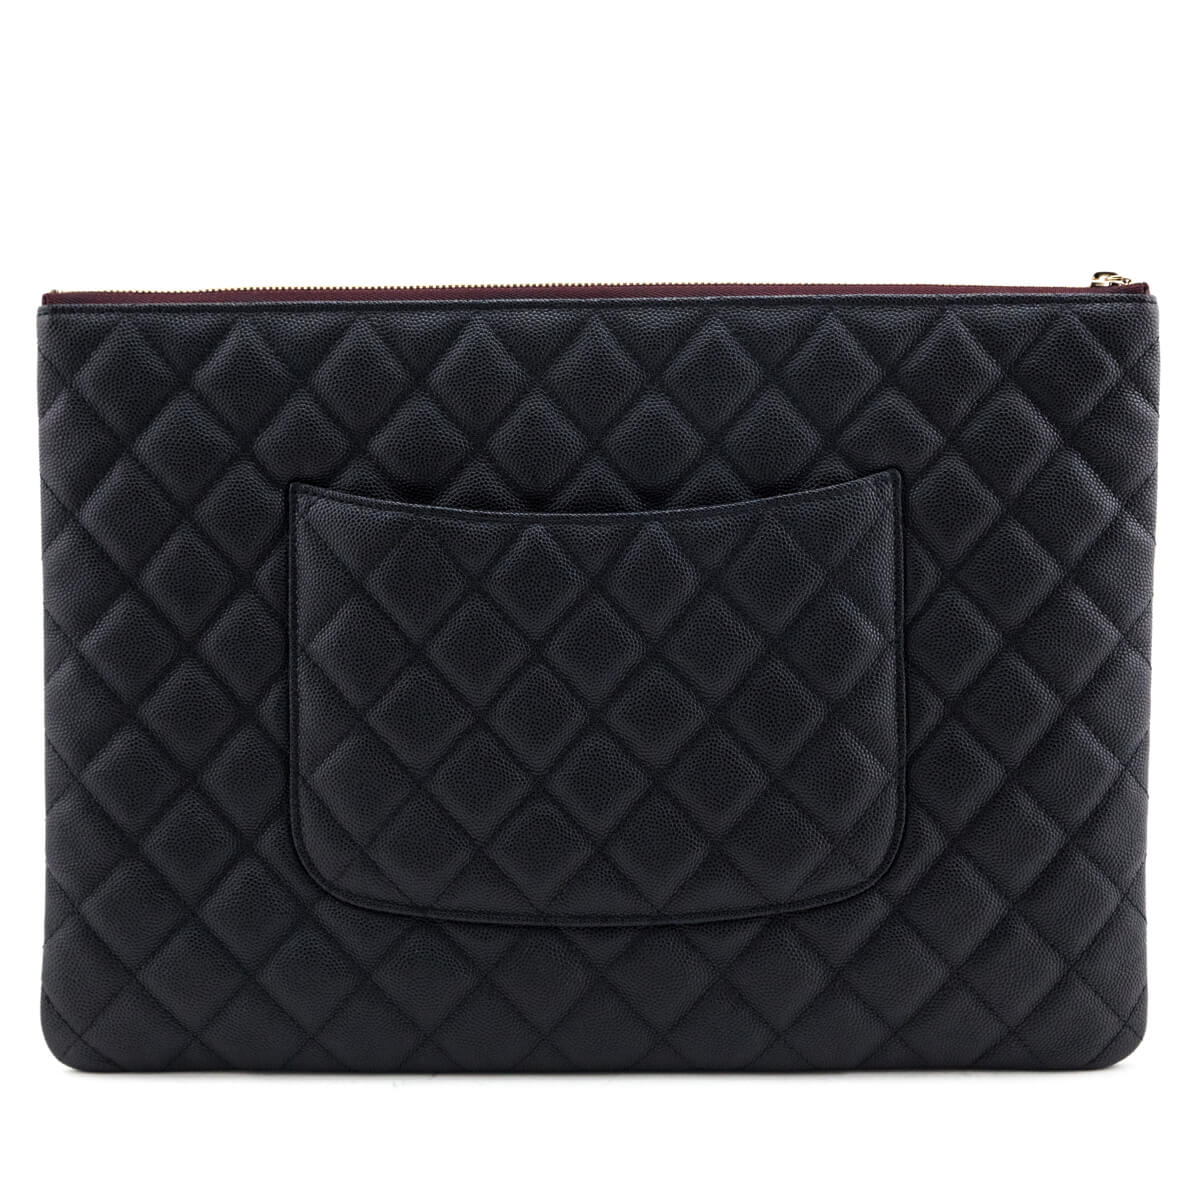 Chanel Black Quilted Caviar Large Classic Pouch - Love that Bag etc - Preowned Authentic Designer Handbags & Preloved Fashions